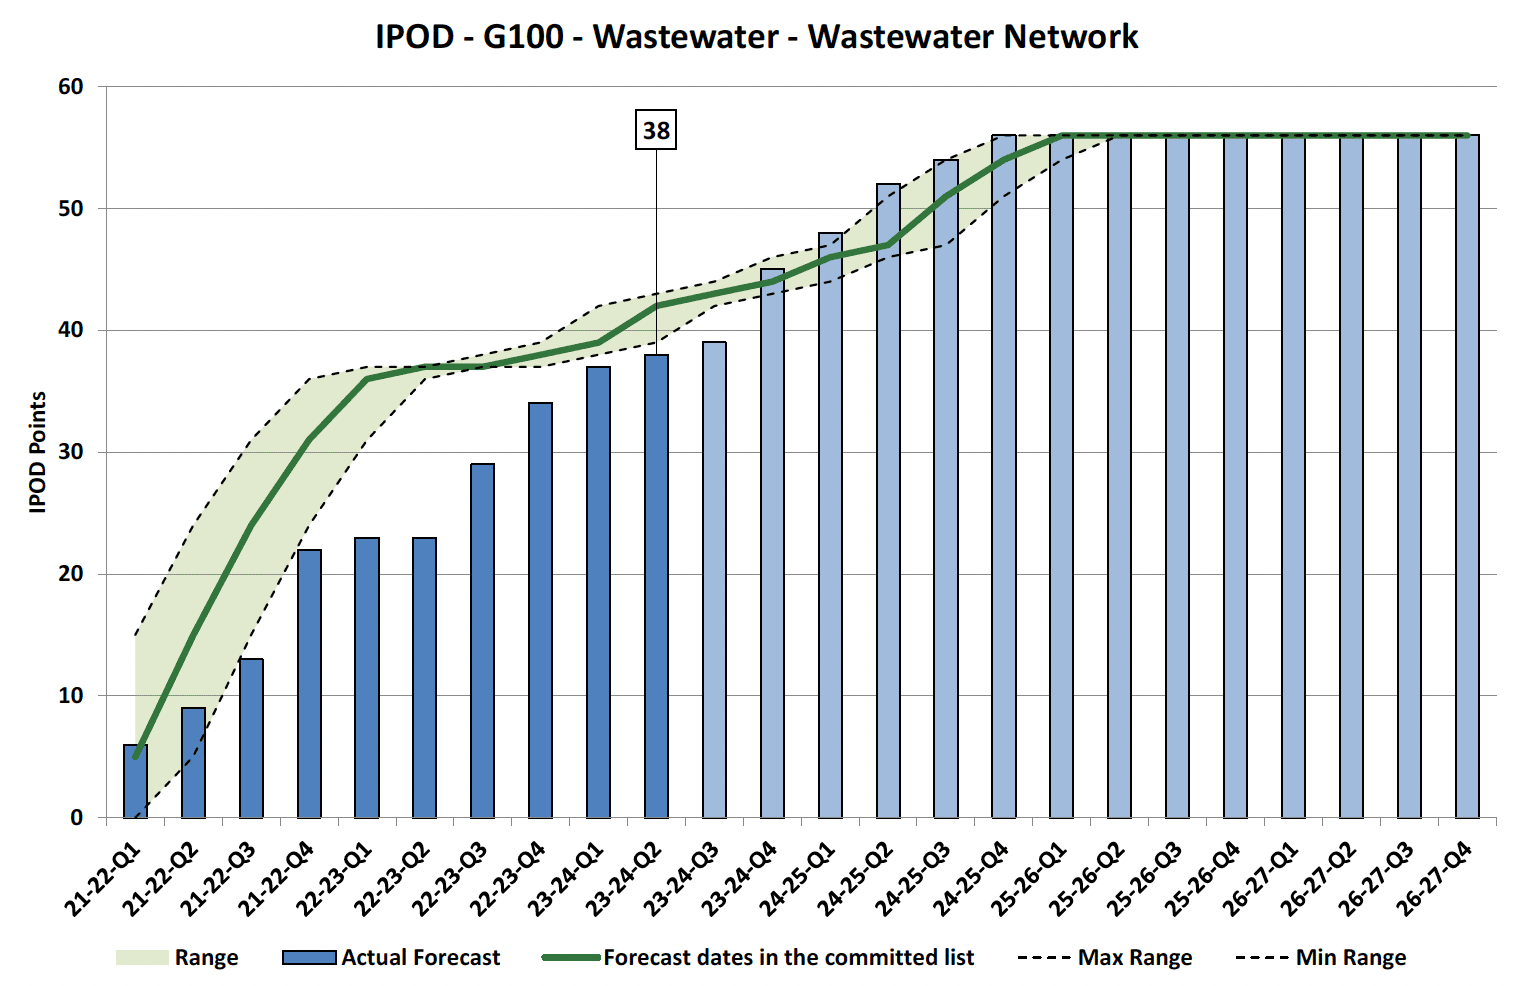 Chart showing IPOD points achieved or forecast for Project Acceptance milestone against target range for Wastewater Network Projects in Wastewater Portfolio